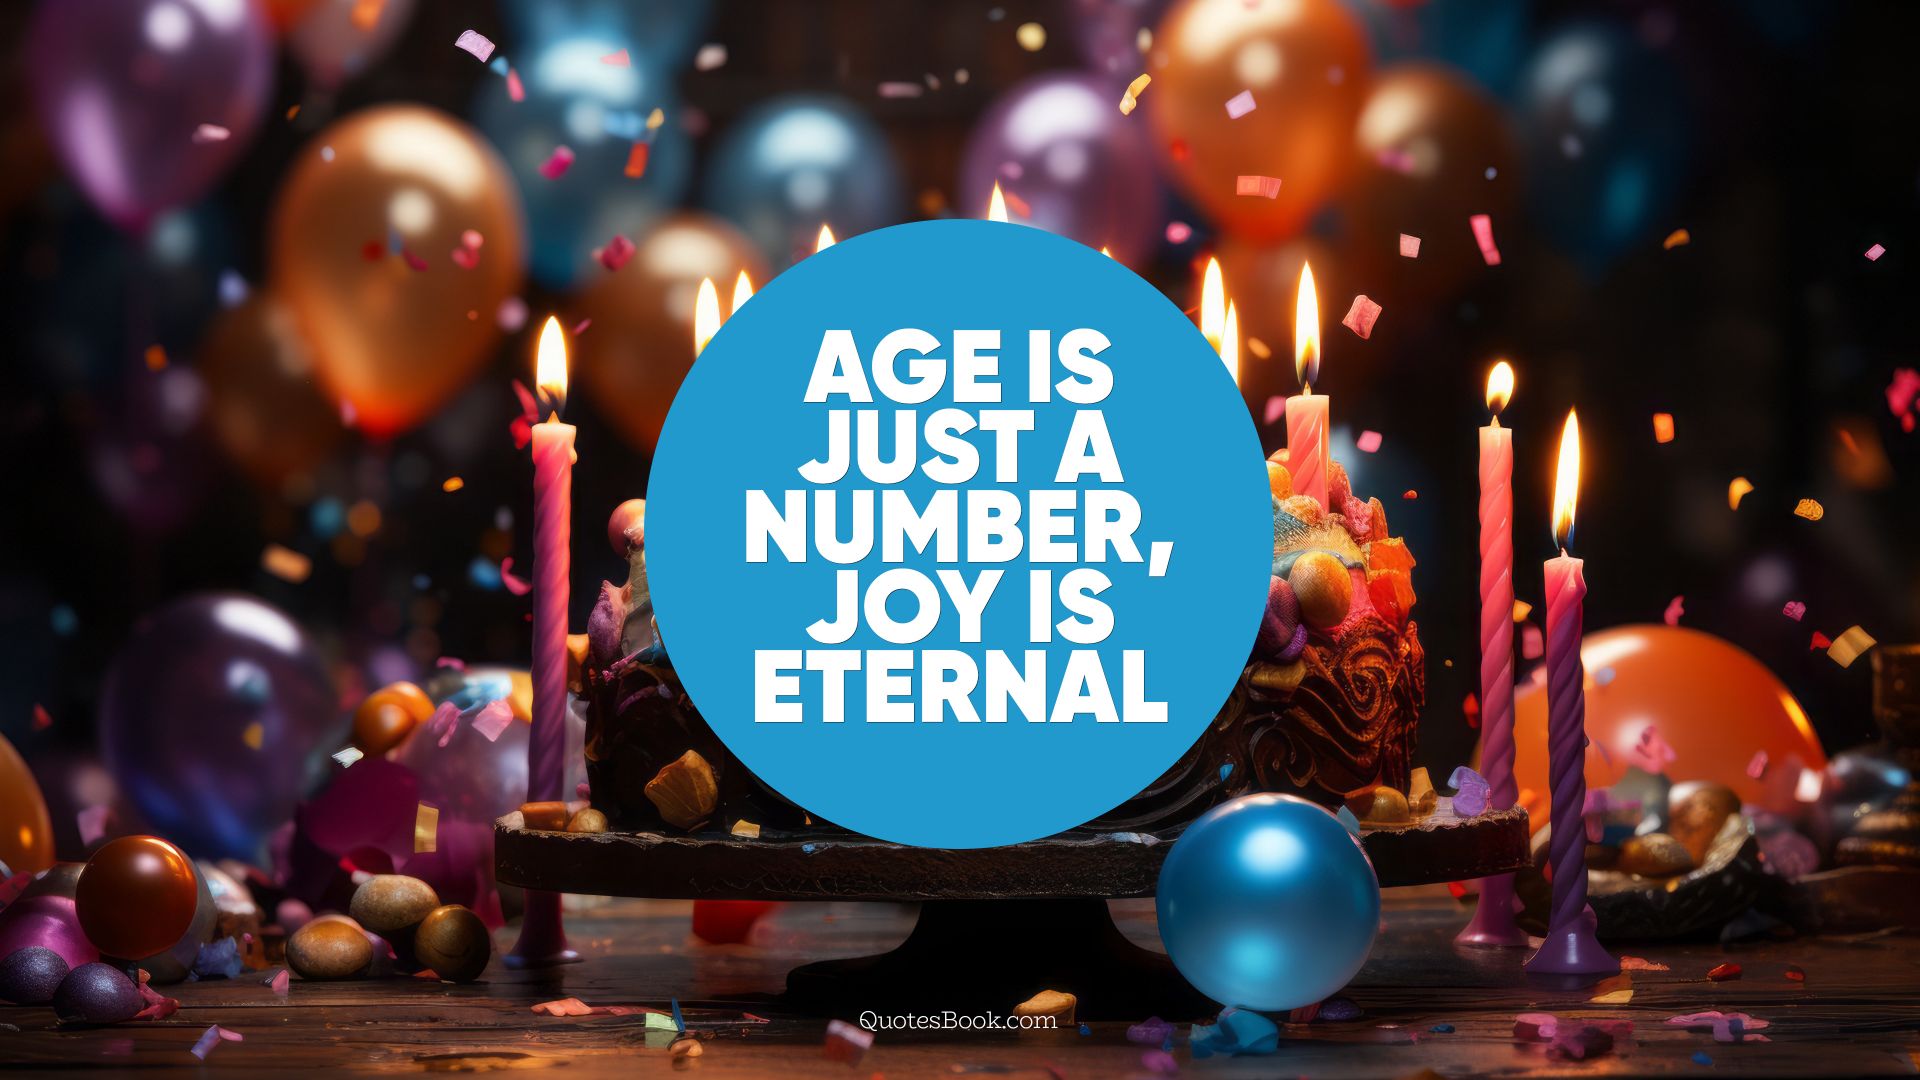 Age is just a number, joy is eternal. - Quote by QuotesBook